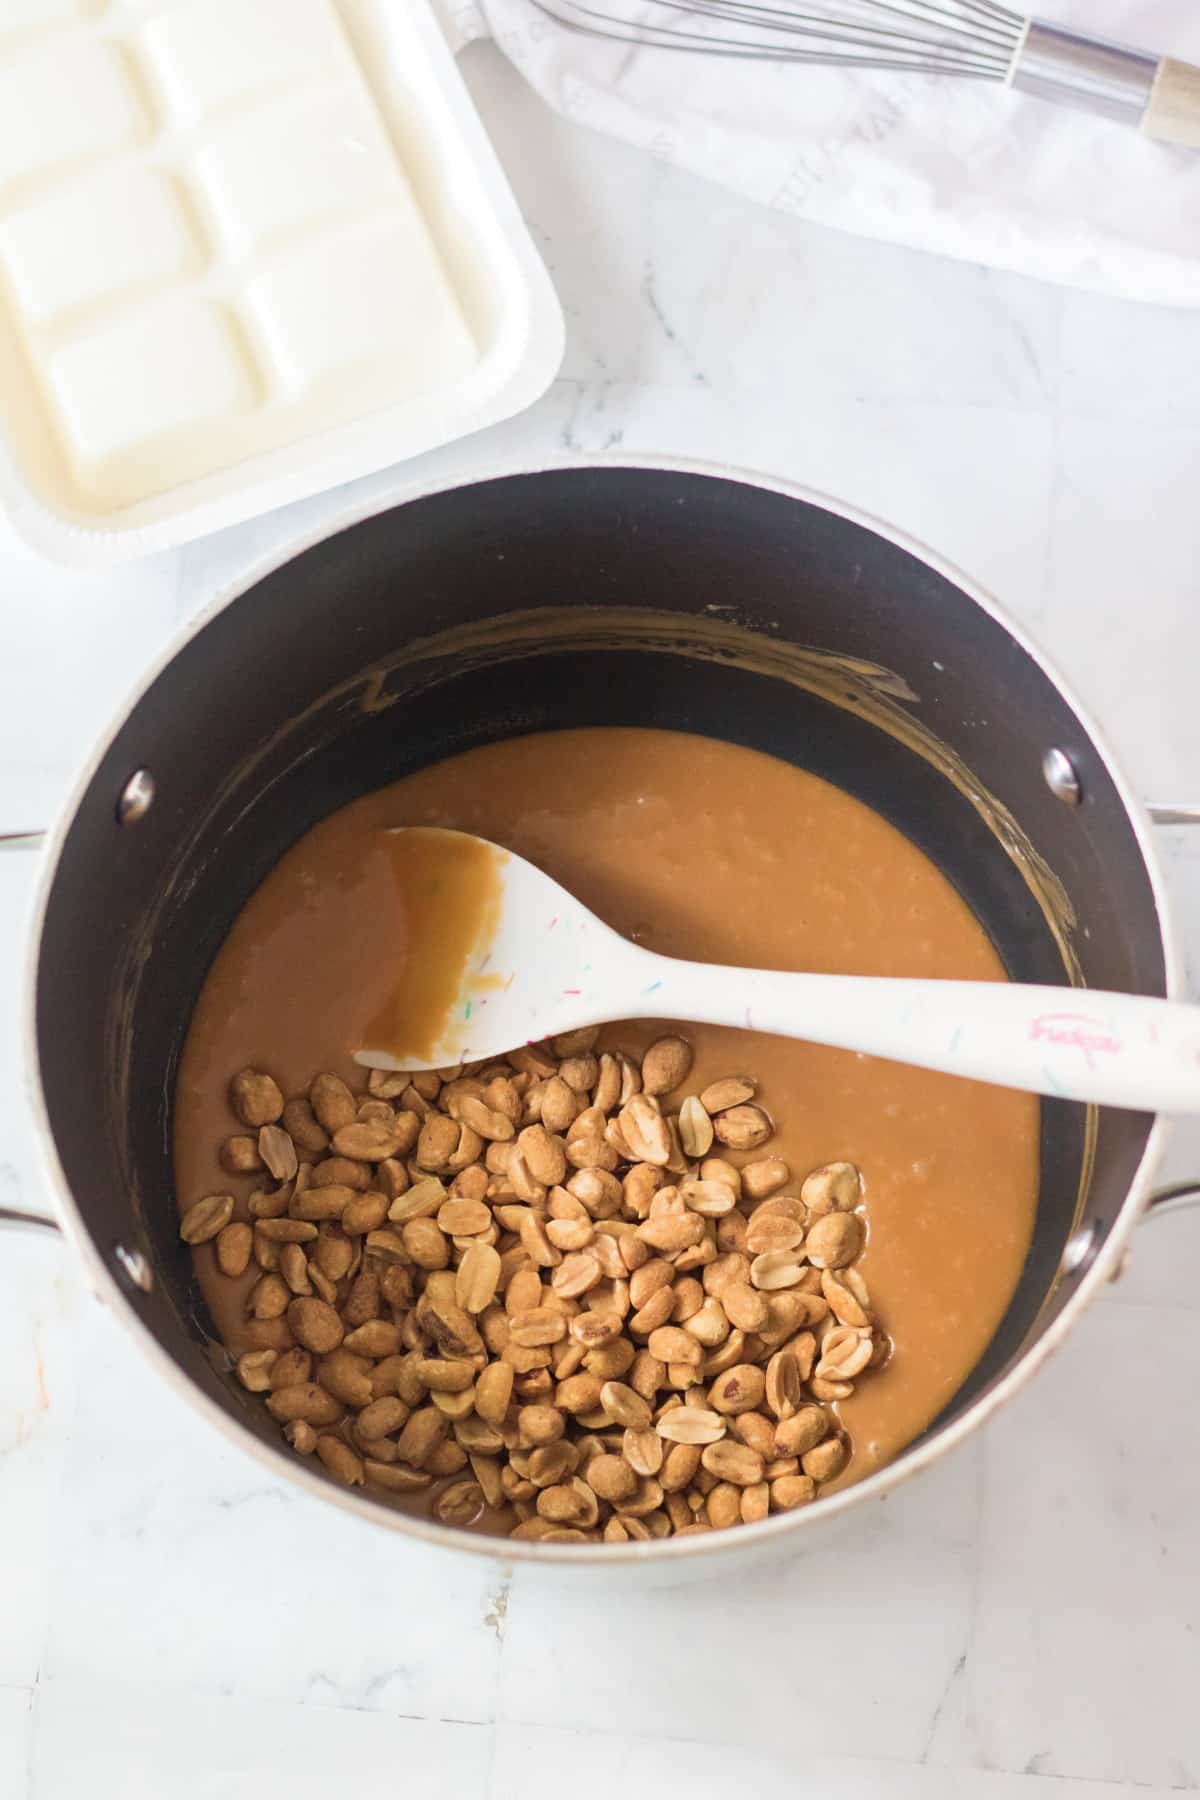 The next step of preparing Polar bear claws is to add peanuts to the melted mixture